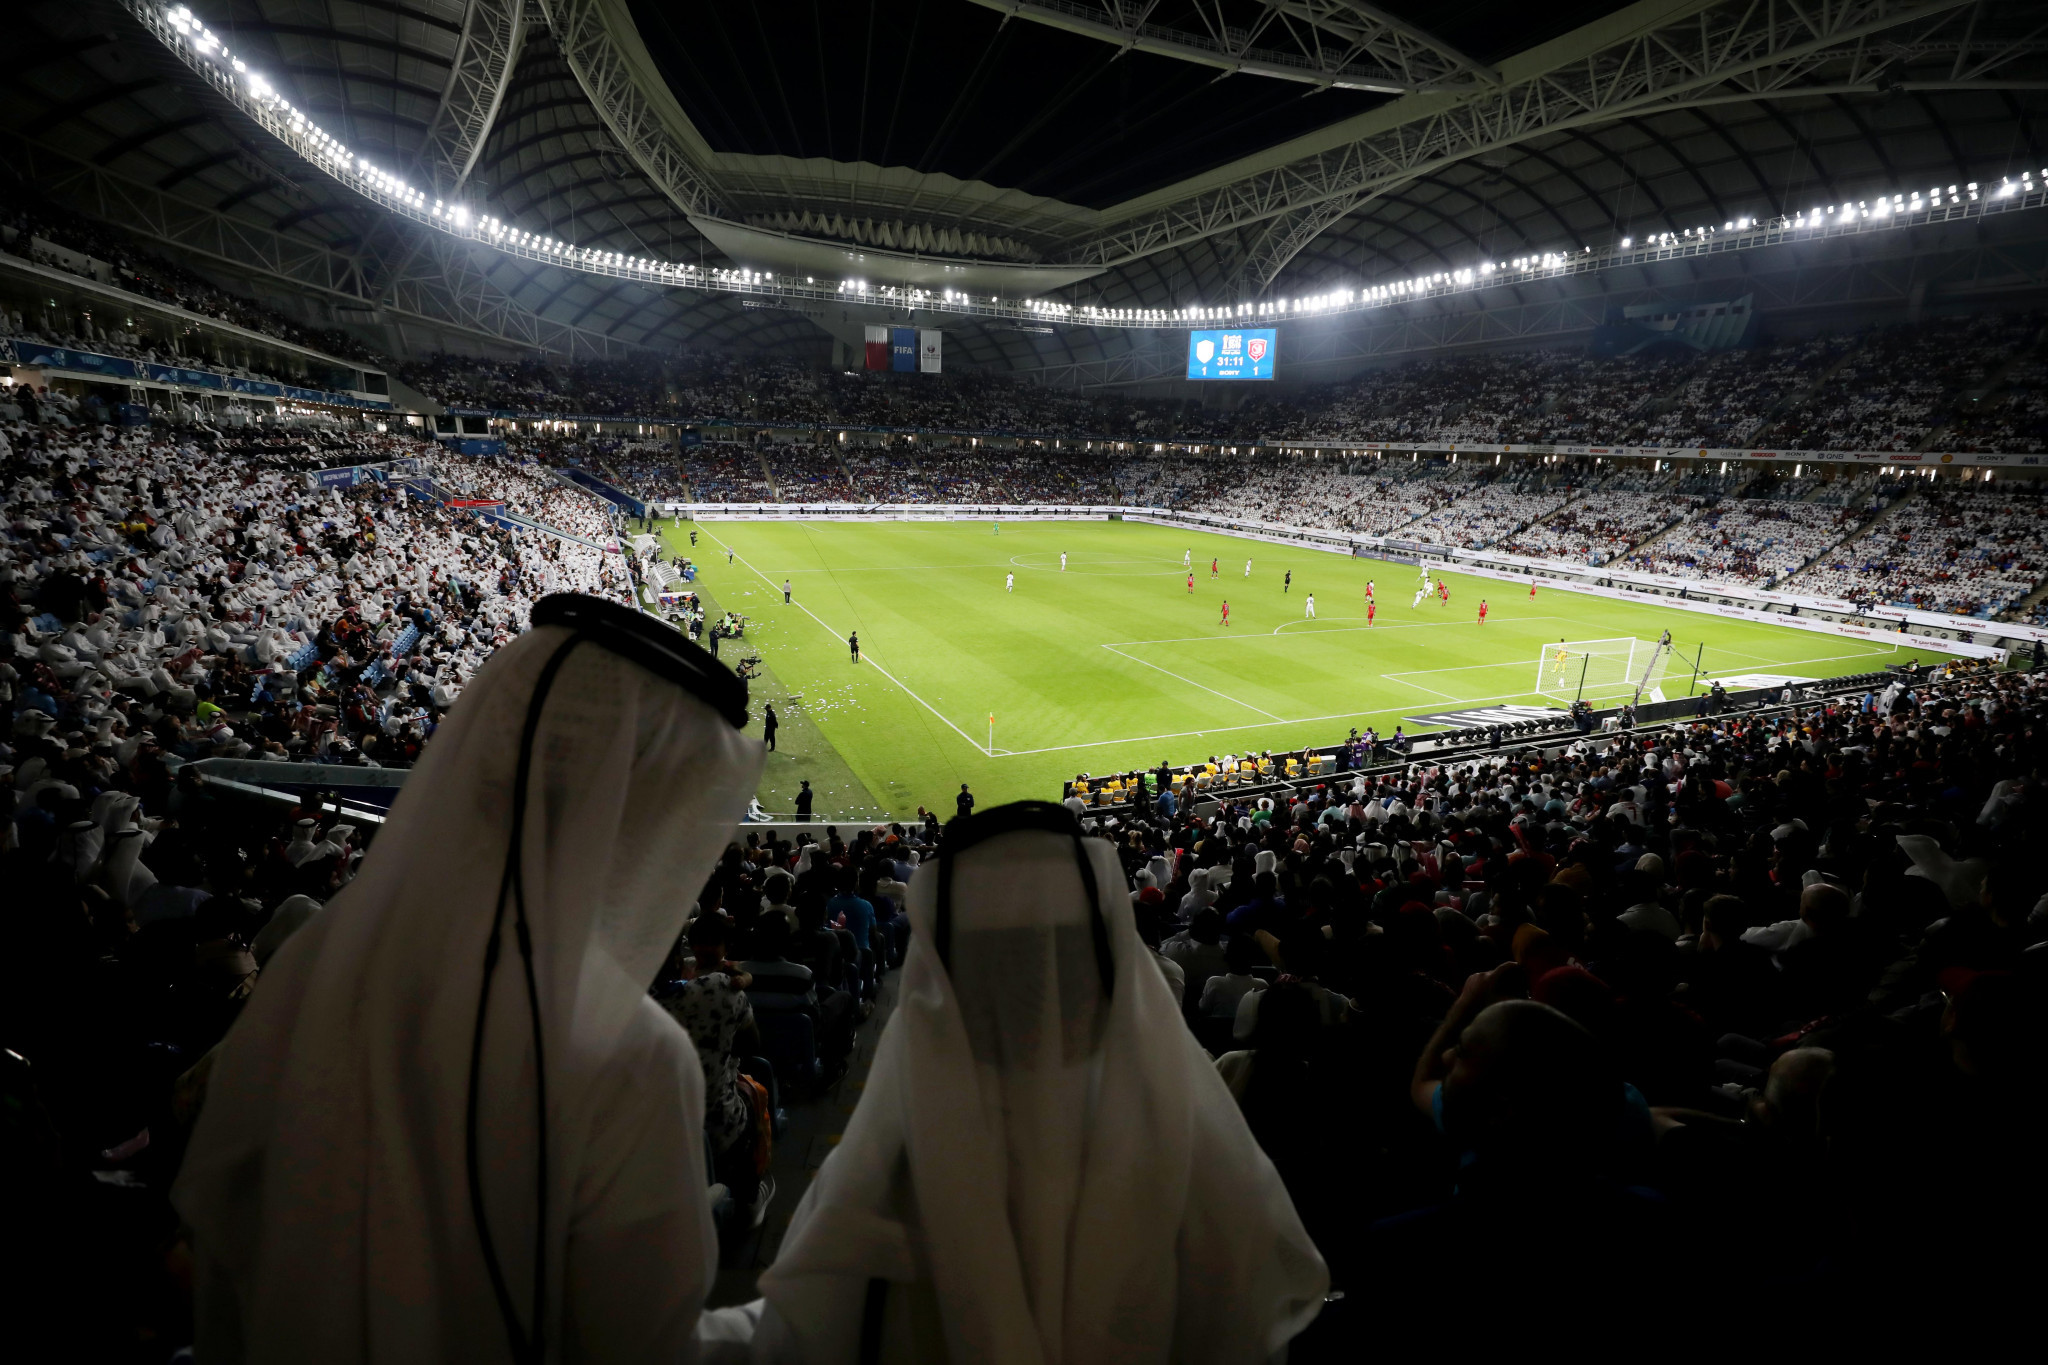 Qatar awarded hosting rights for 2019 and 2020 Club World Cups by FIFA Council